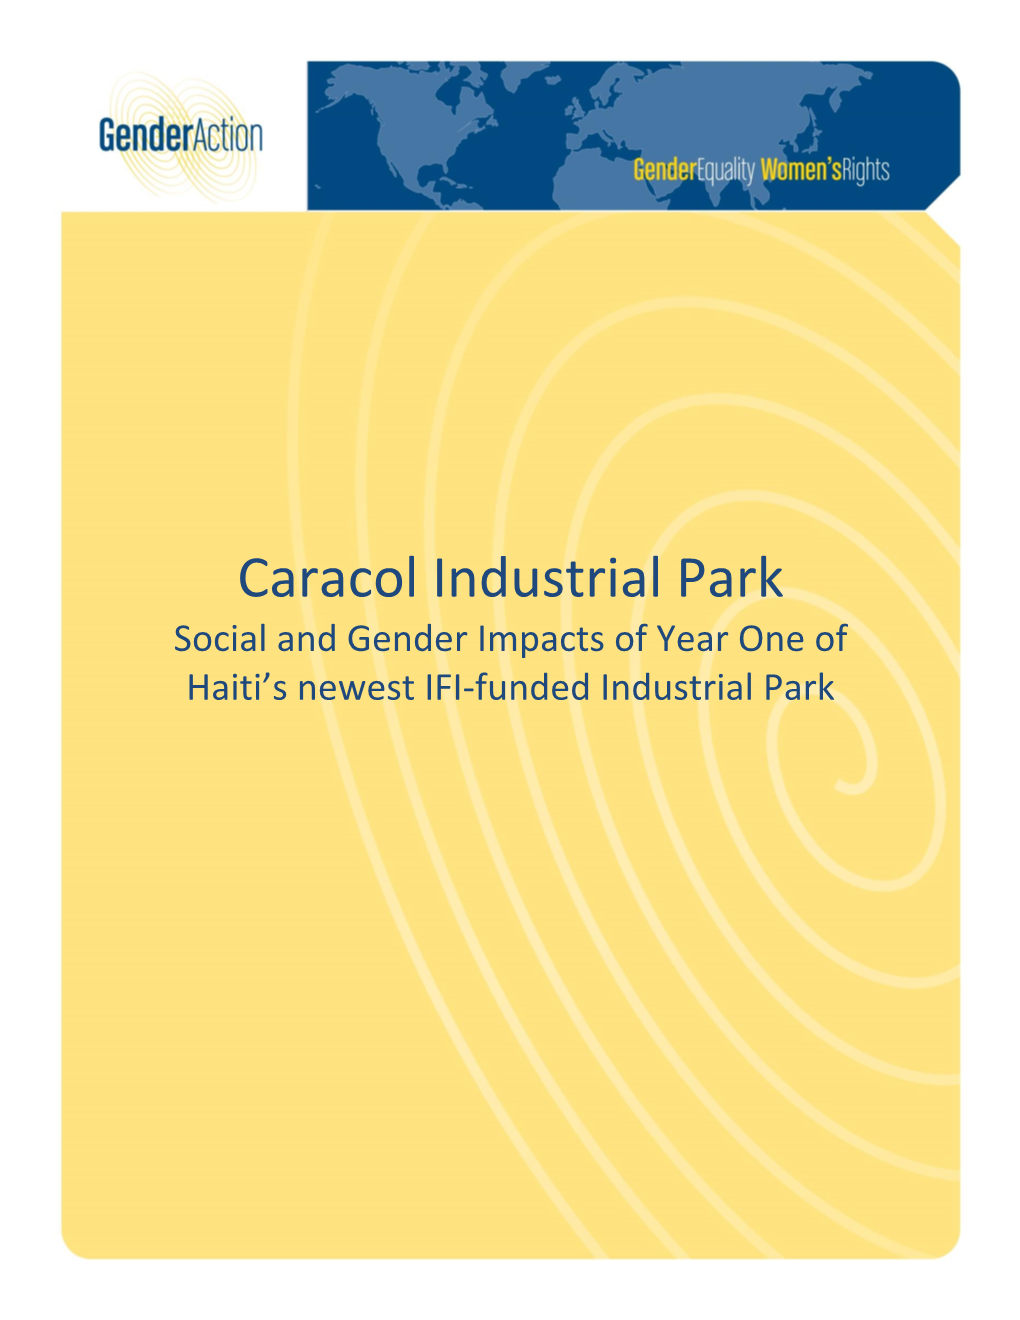 Caracol Industrial Park Social and Gender Impacts of Year One of Haiti’S Newest IFI-Funded Industrial Park